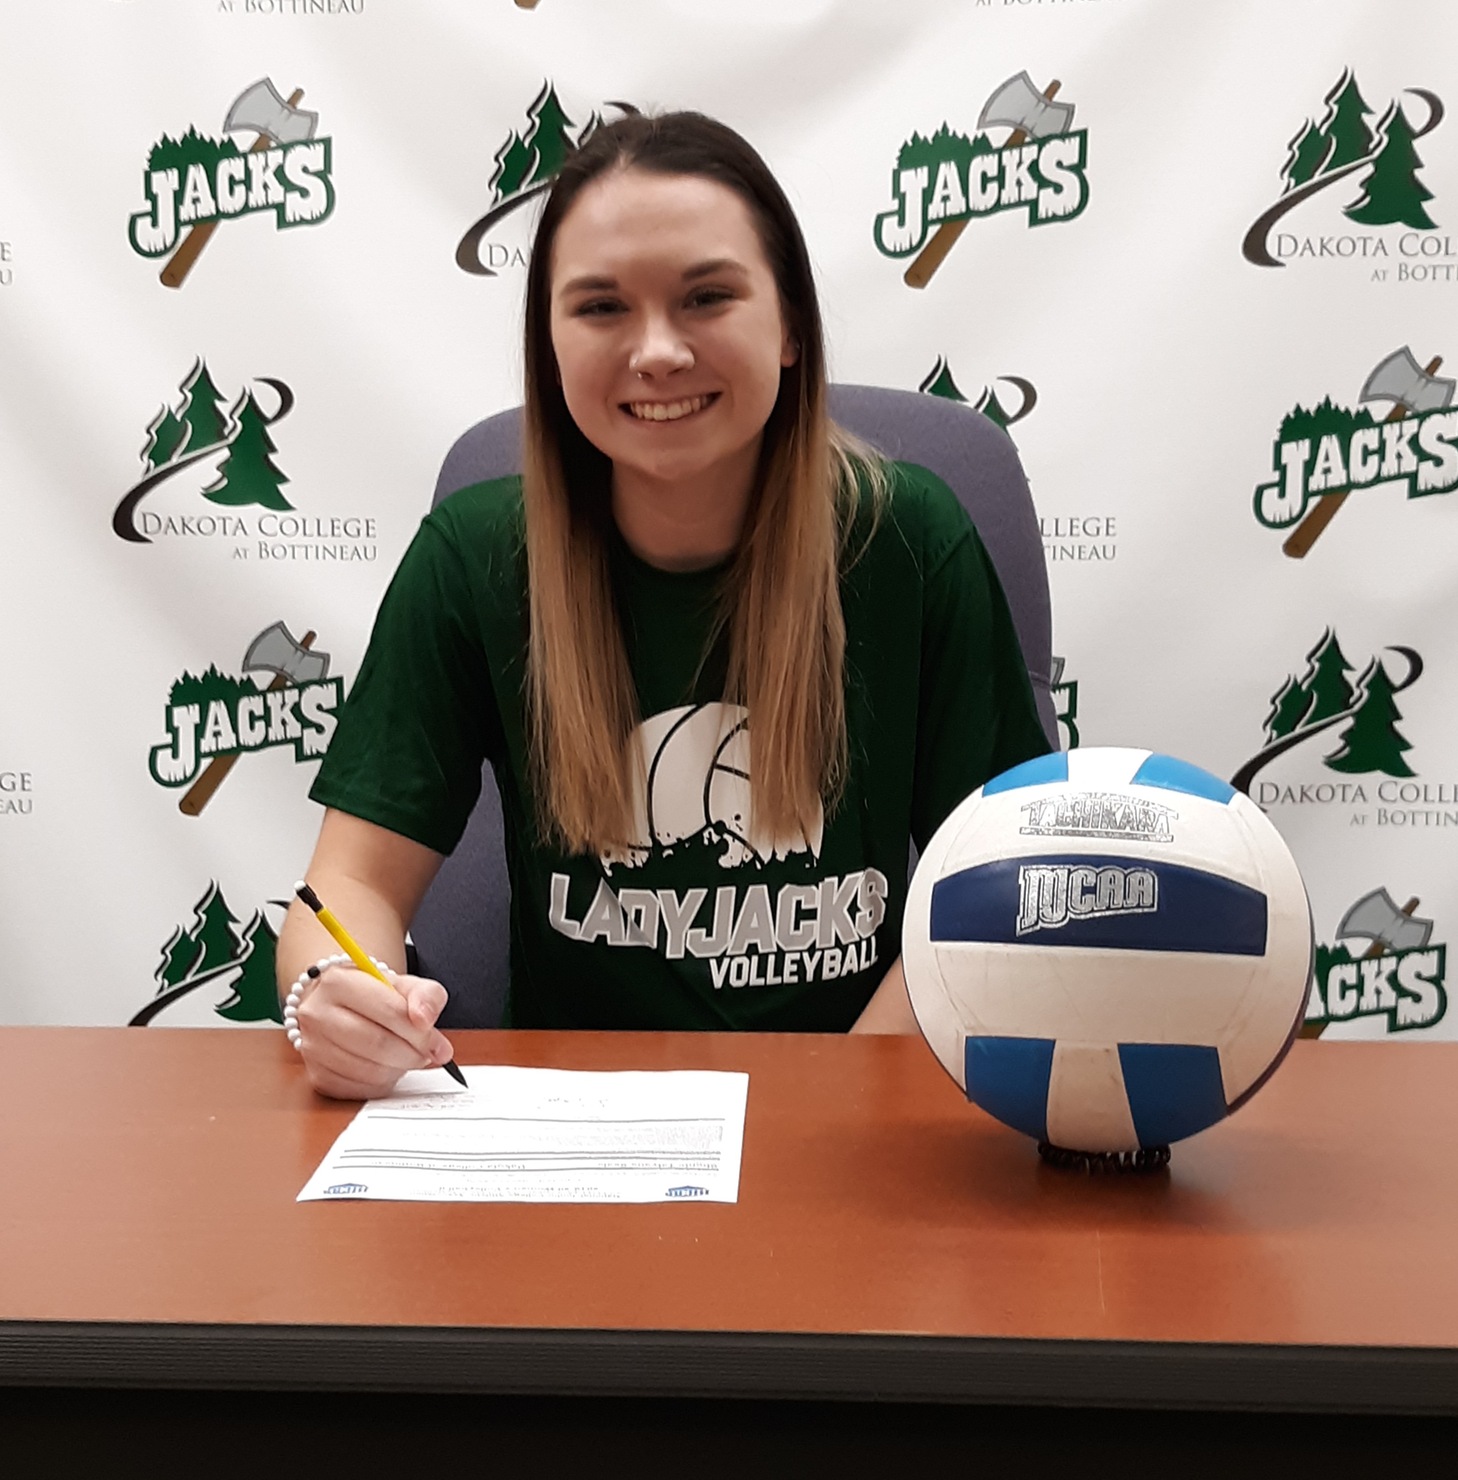 Virden, Manitoba's Amy Lewis signs an NJCAA Letter of Intent to play for DCB in the fall of 2020.